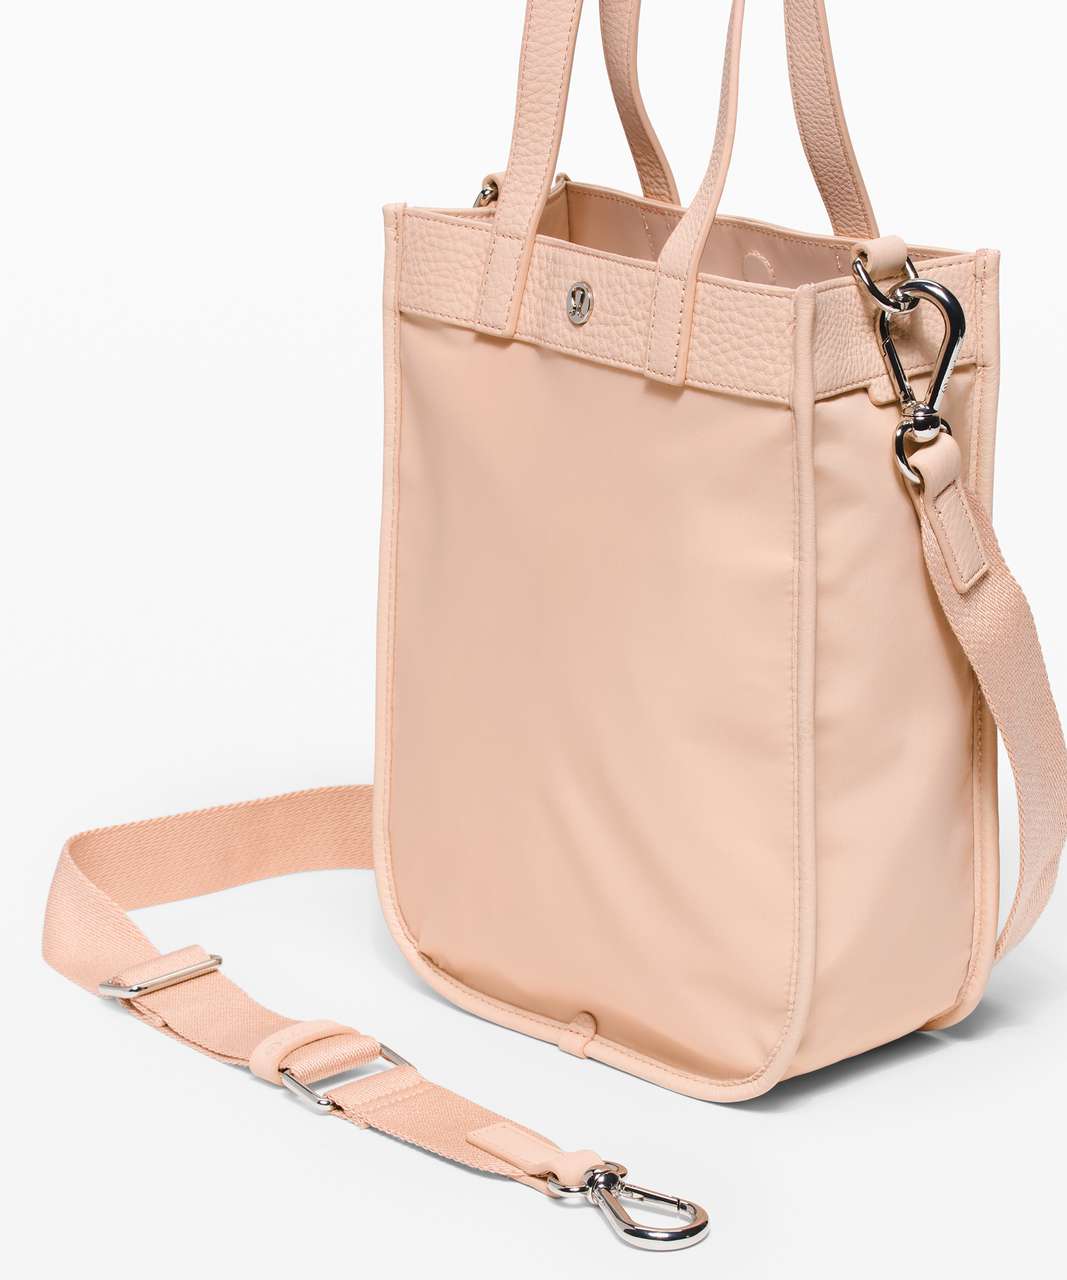 Lululemon Now And Always Tote Mini 8L - Misty Shell / Soft Sand